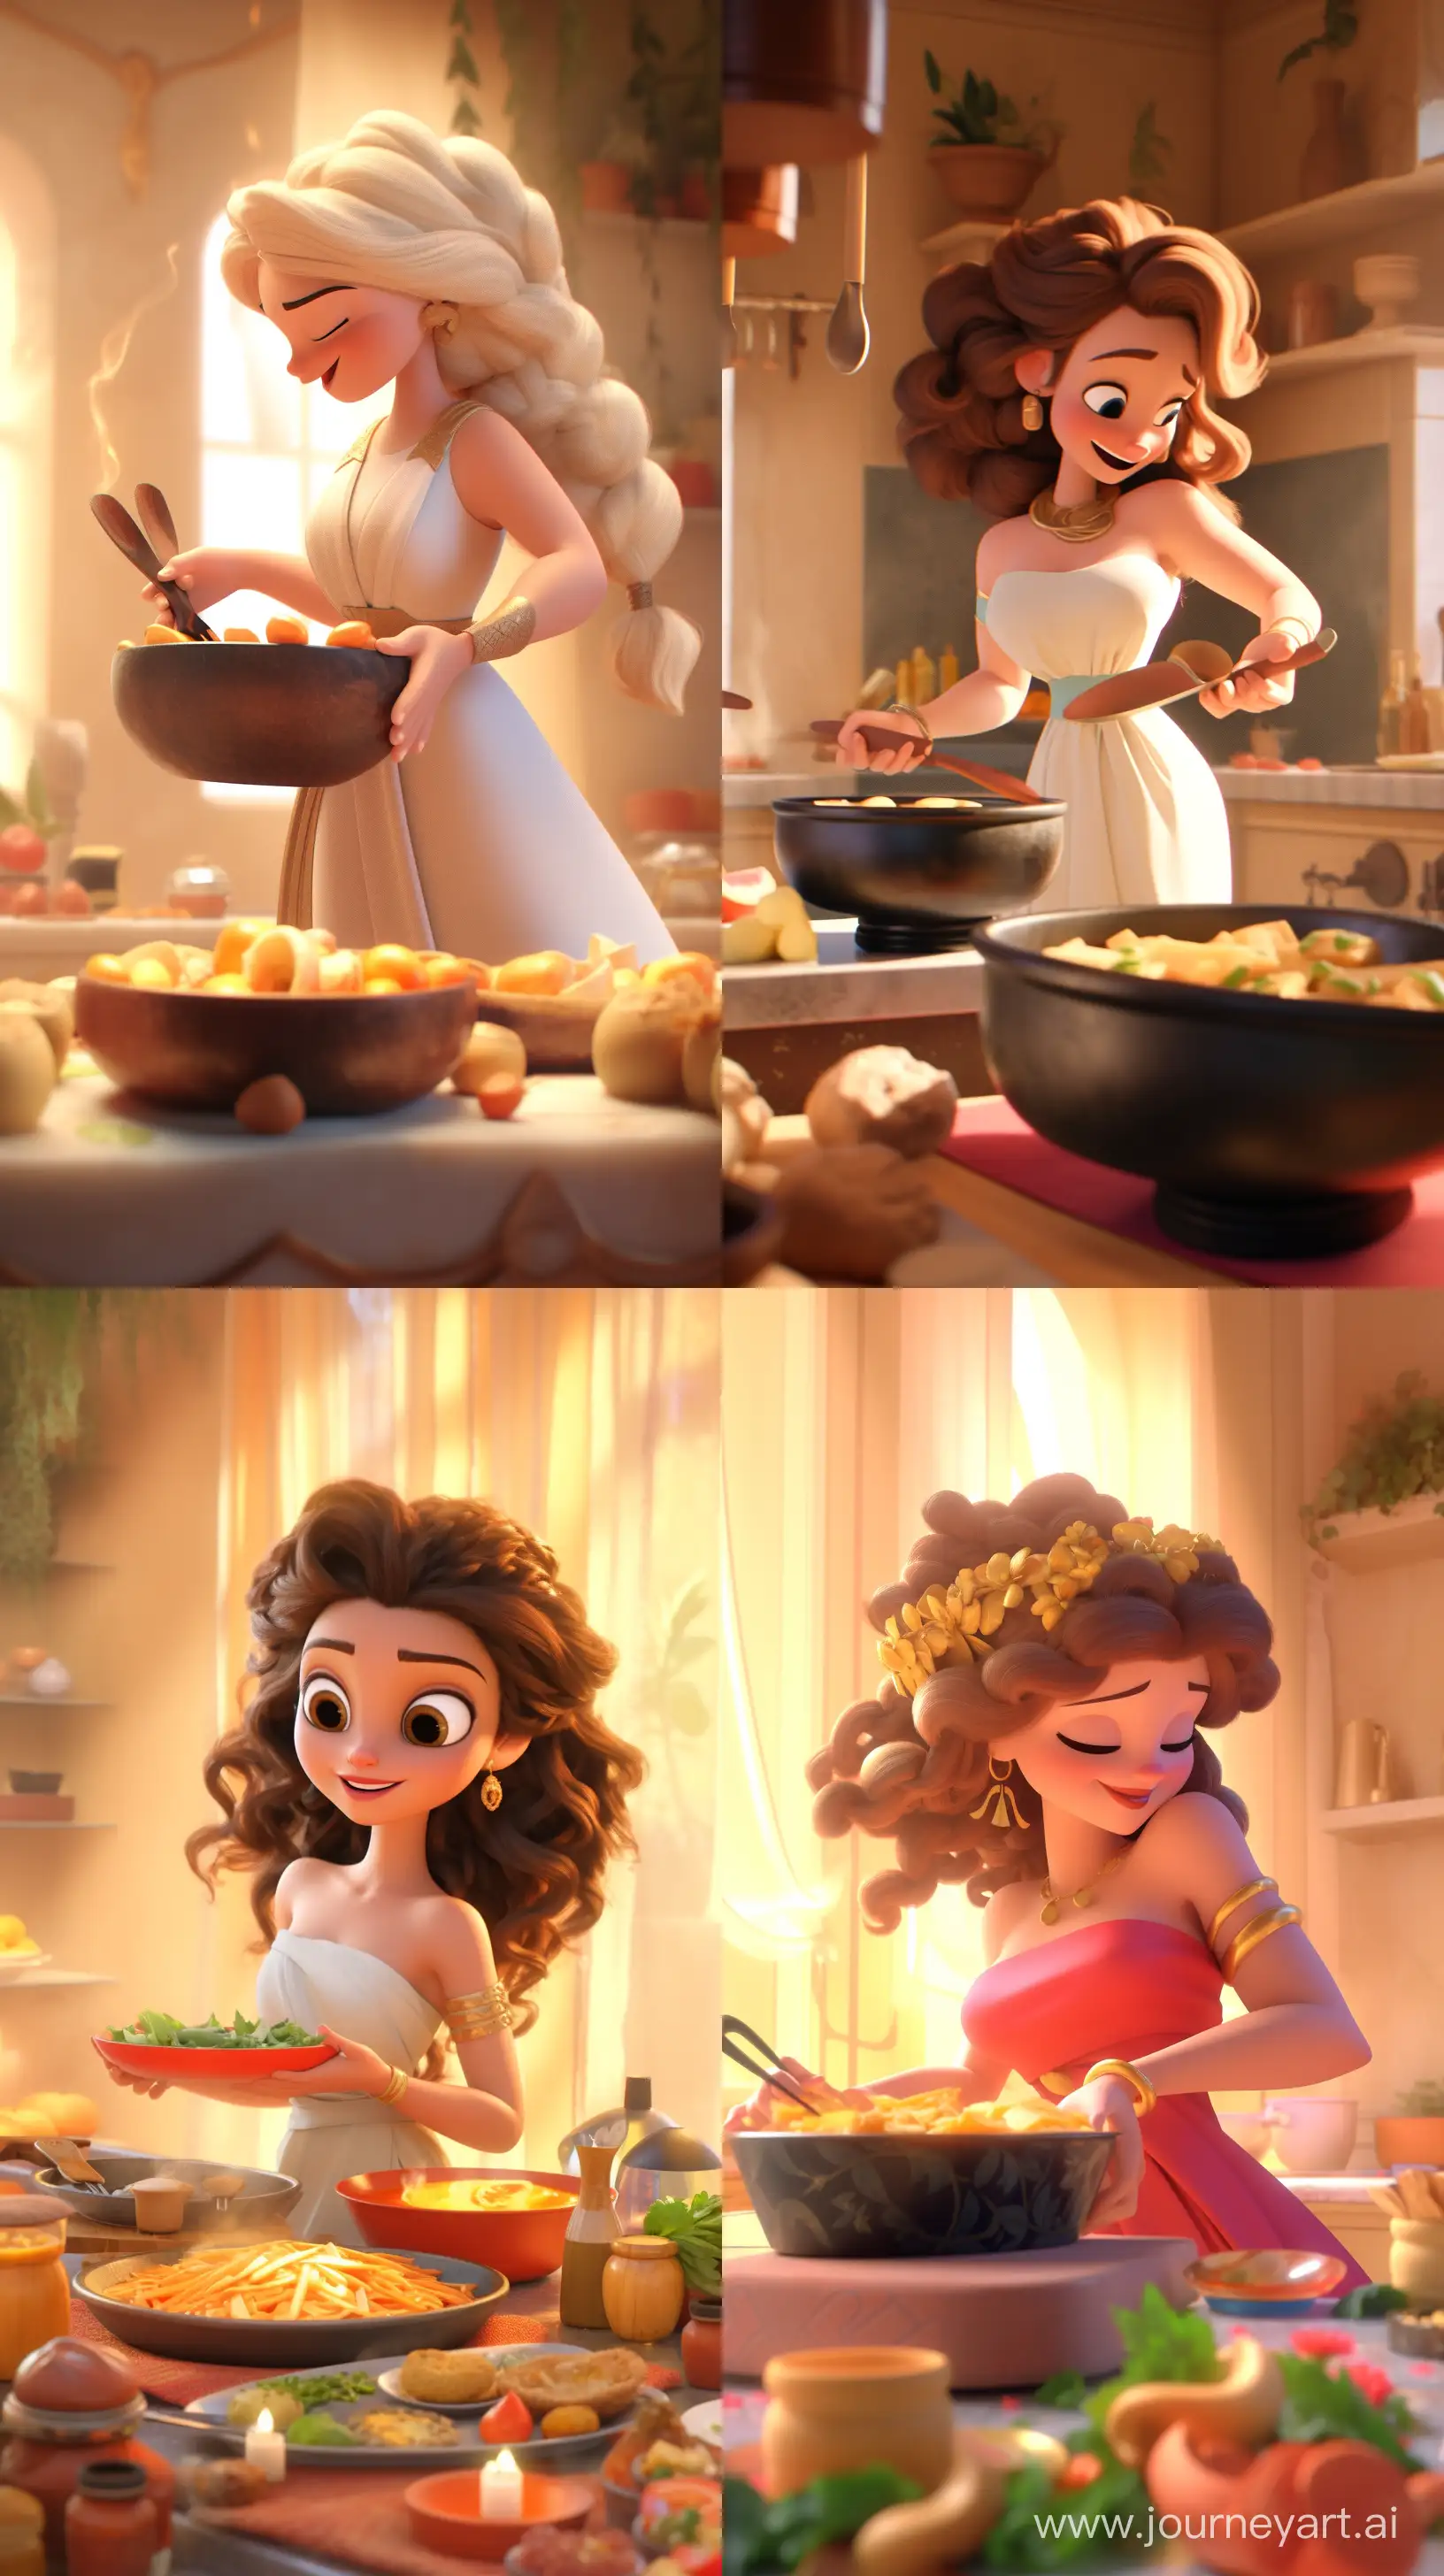 Greek-Goddess-Cooking-Feast-in-Stunning-PixarStyle-3D-Animation